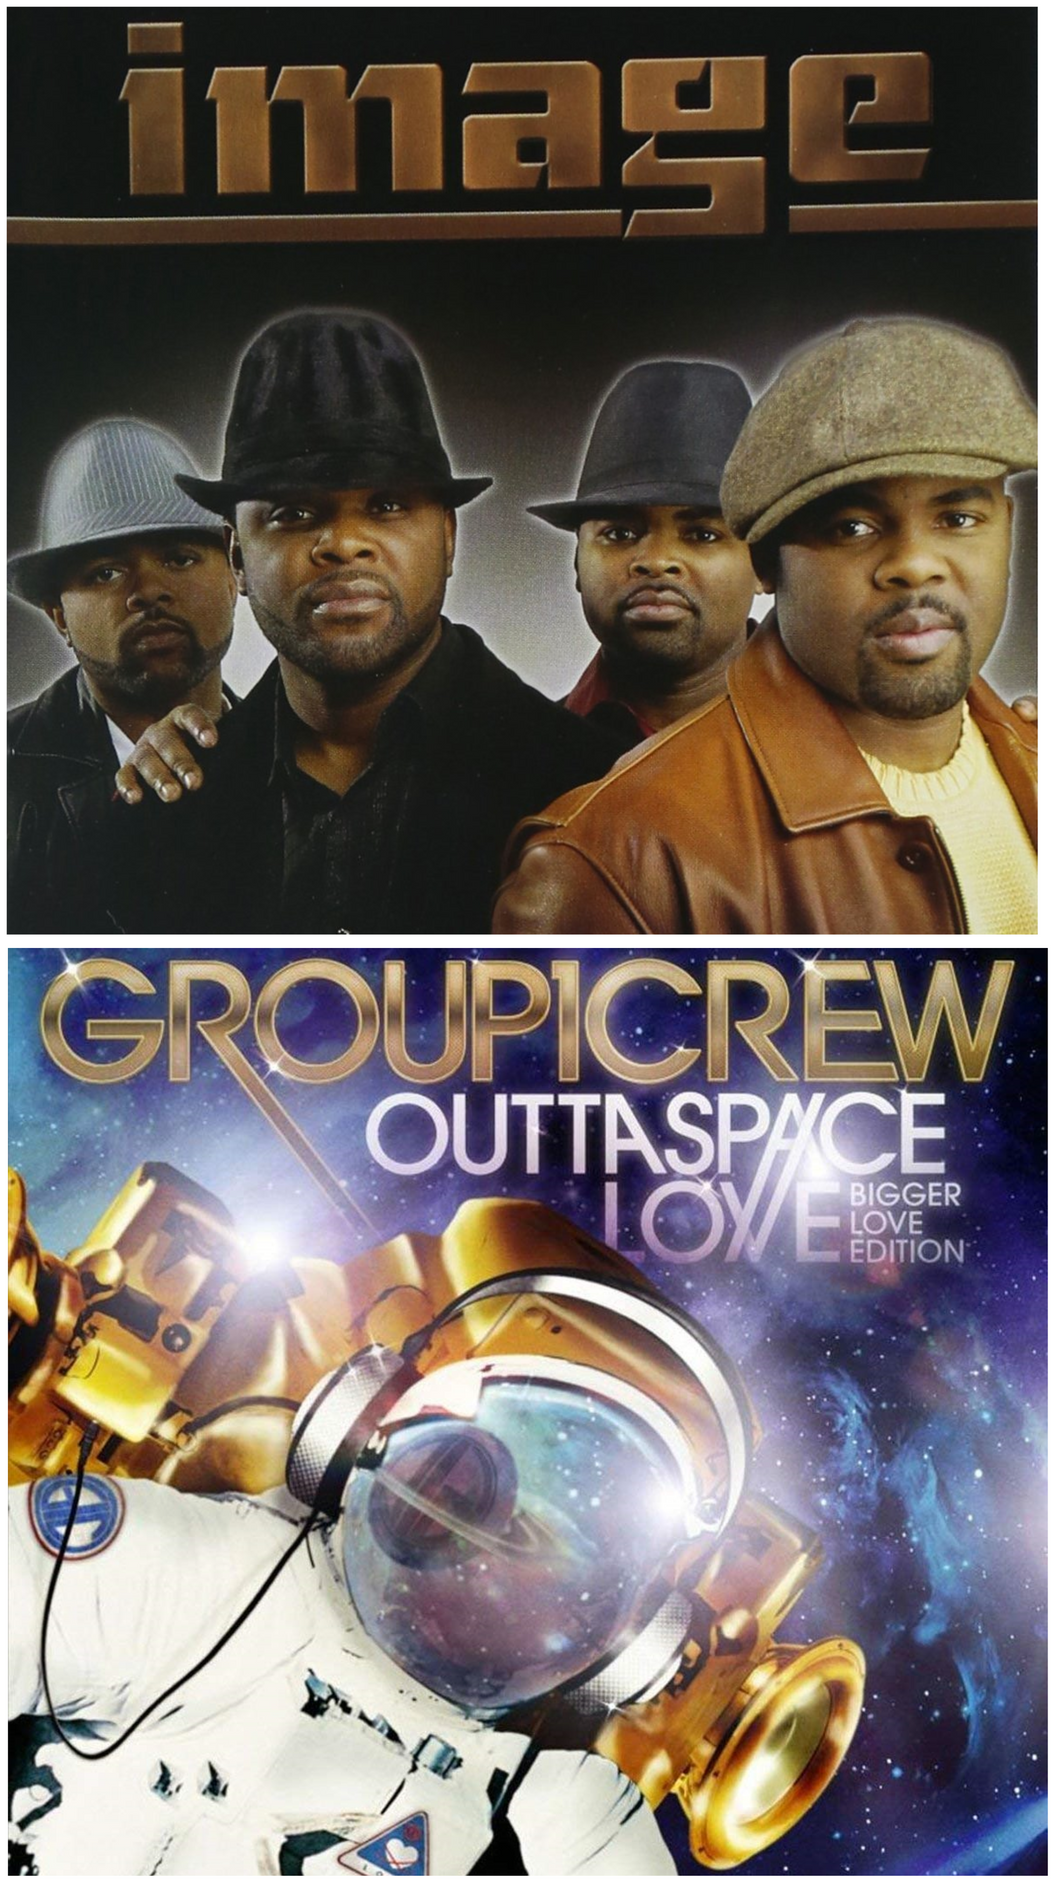 Image Then/Now + Group 1 Crew Outta Space Love 2CD